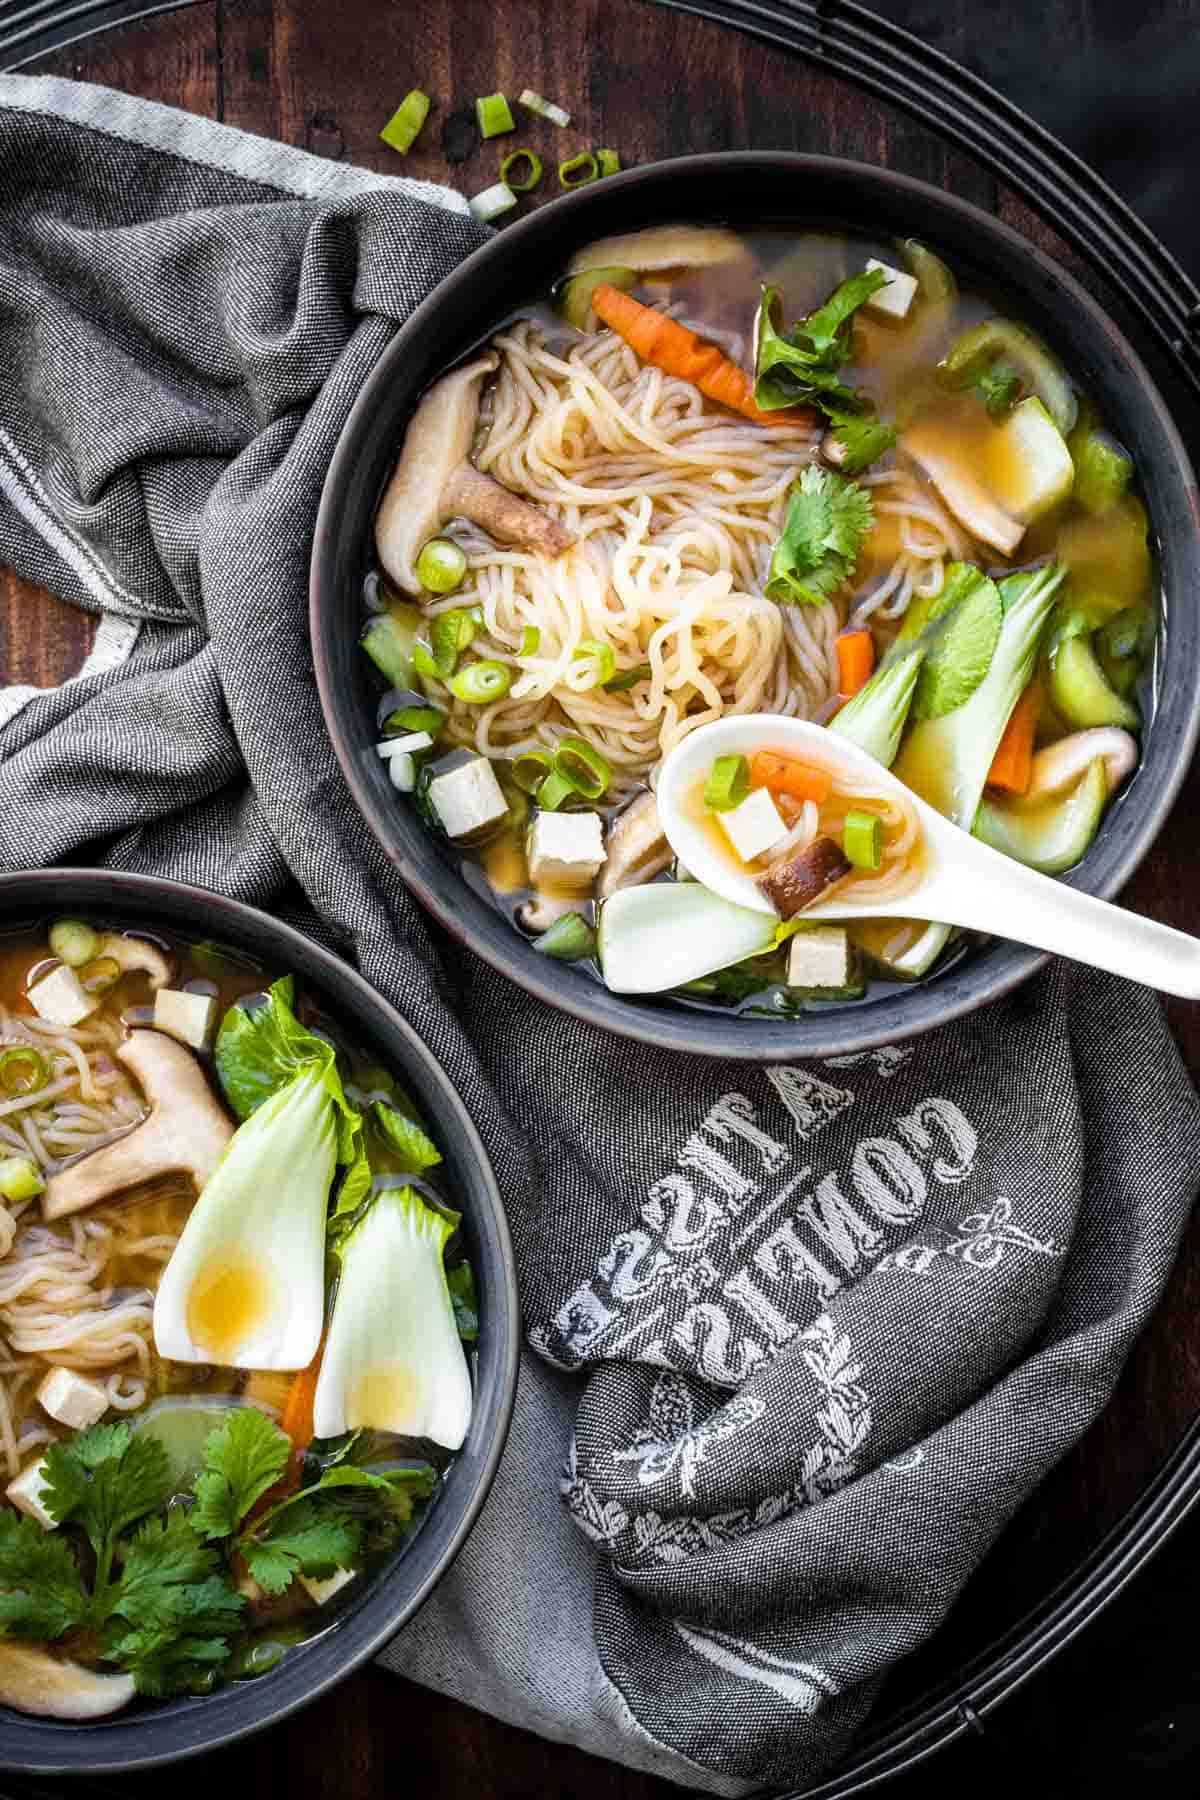 White Asian soup spoon in a bowl of veggie and noodle soup